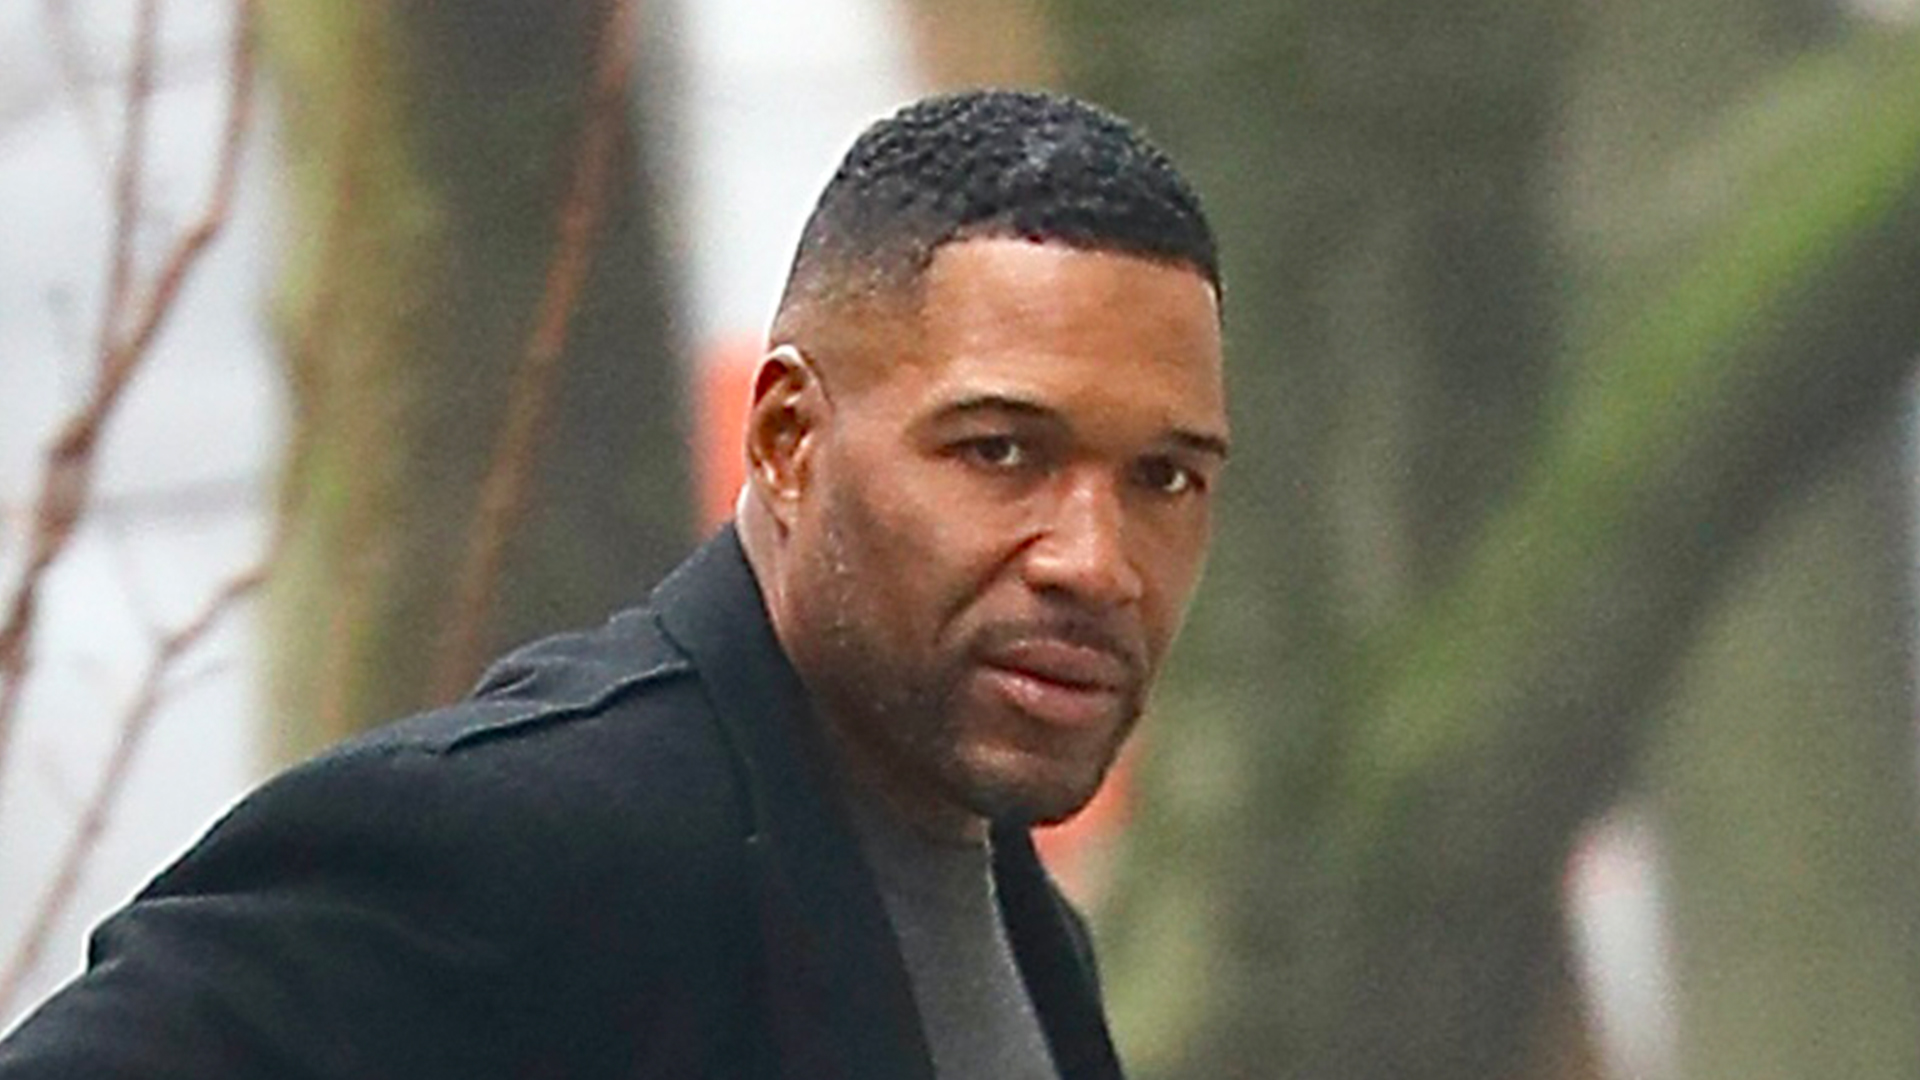 Michael Strahan looks worried on rainy day outing in NYC after daughter Isabella’s brain tumor battle